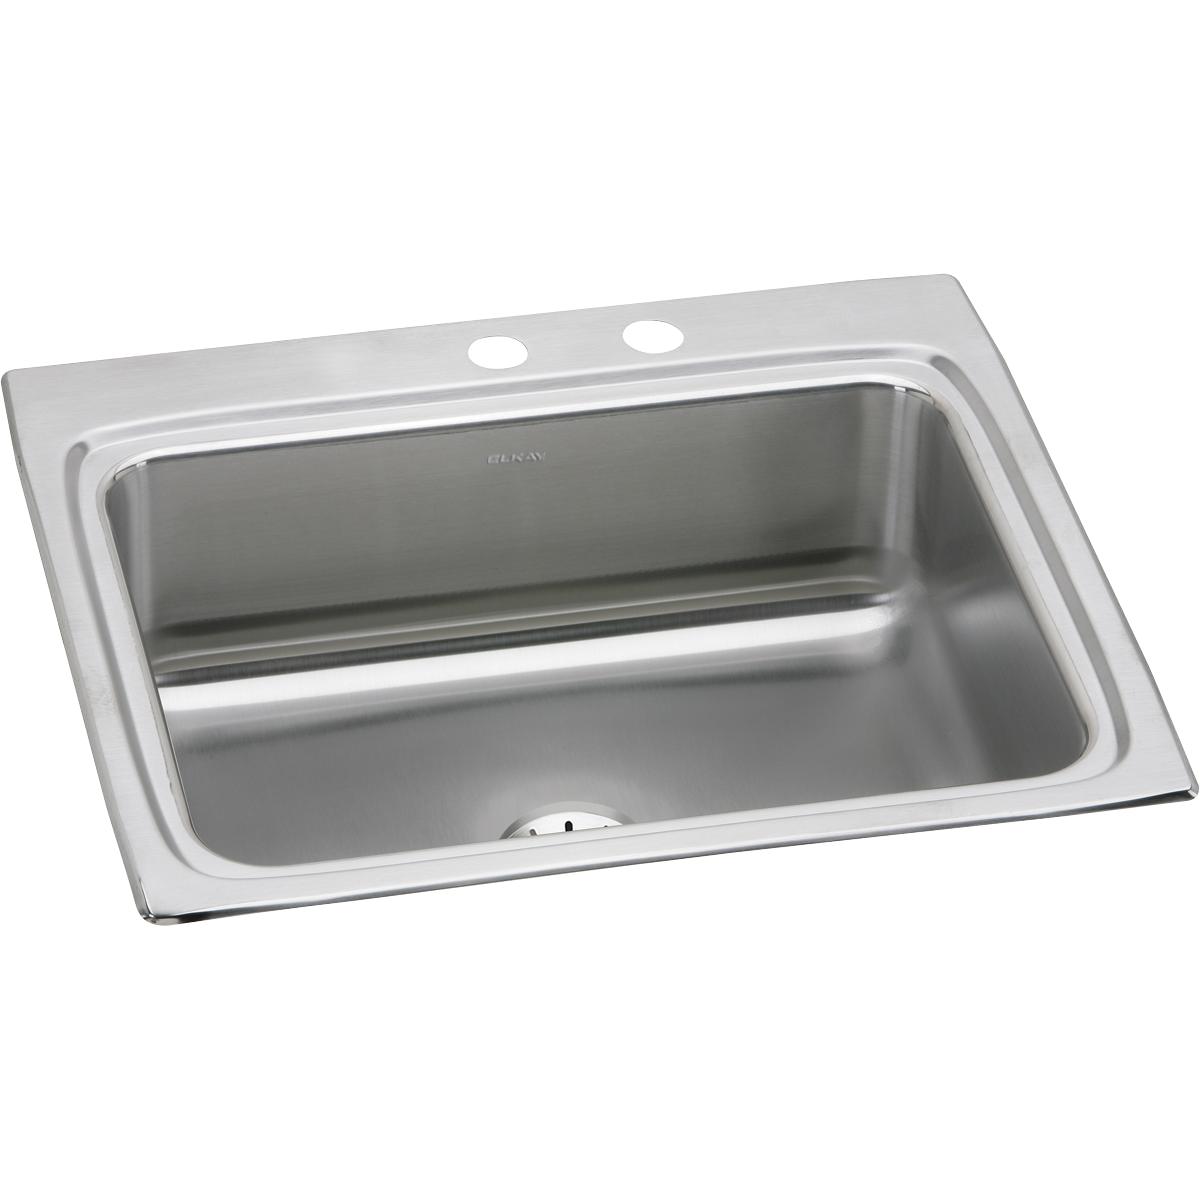 Elkay Lustertone Classic 25" x 22" x 8-1/8" MR2-Hole Single Bowl Drop-in Sink with Perfect Drain